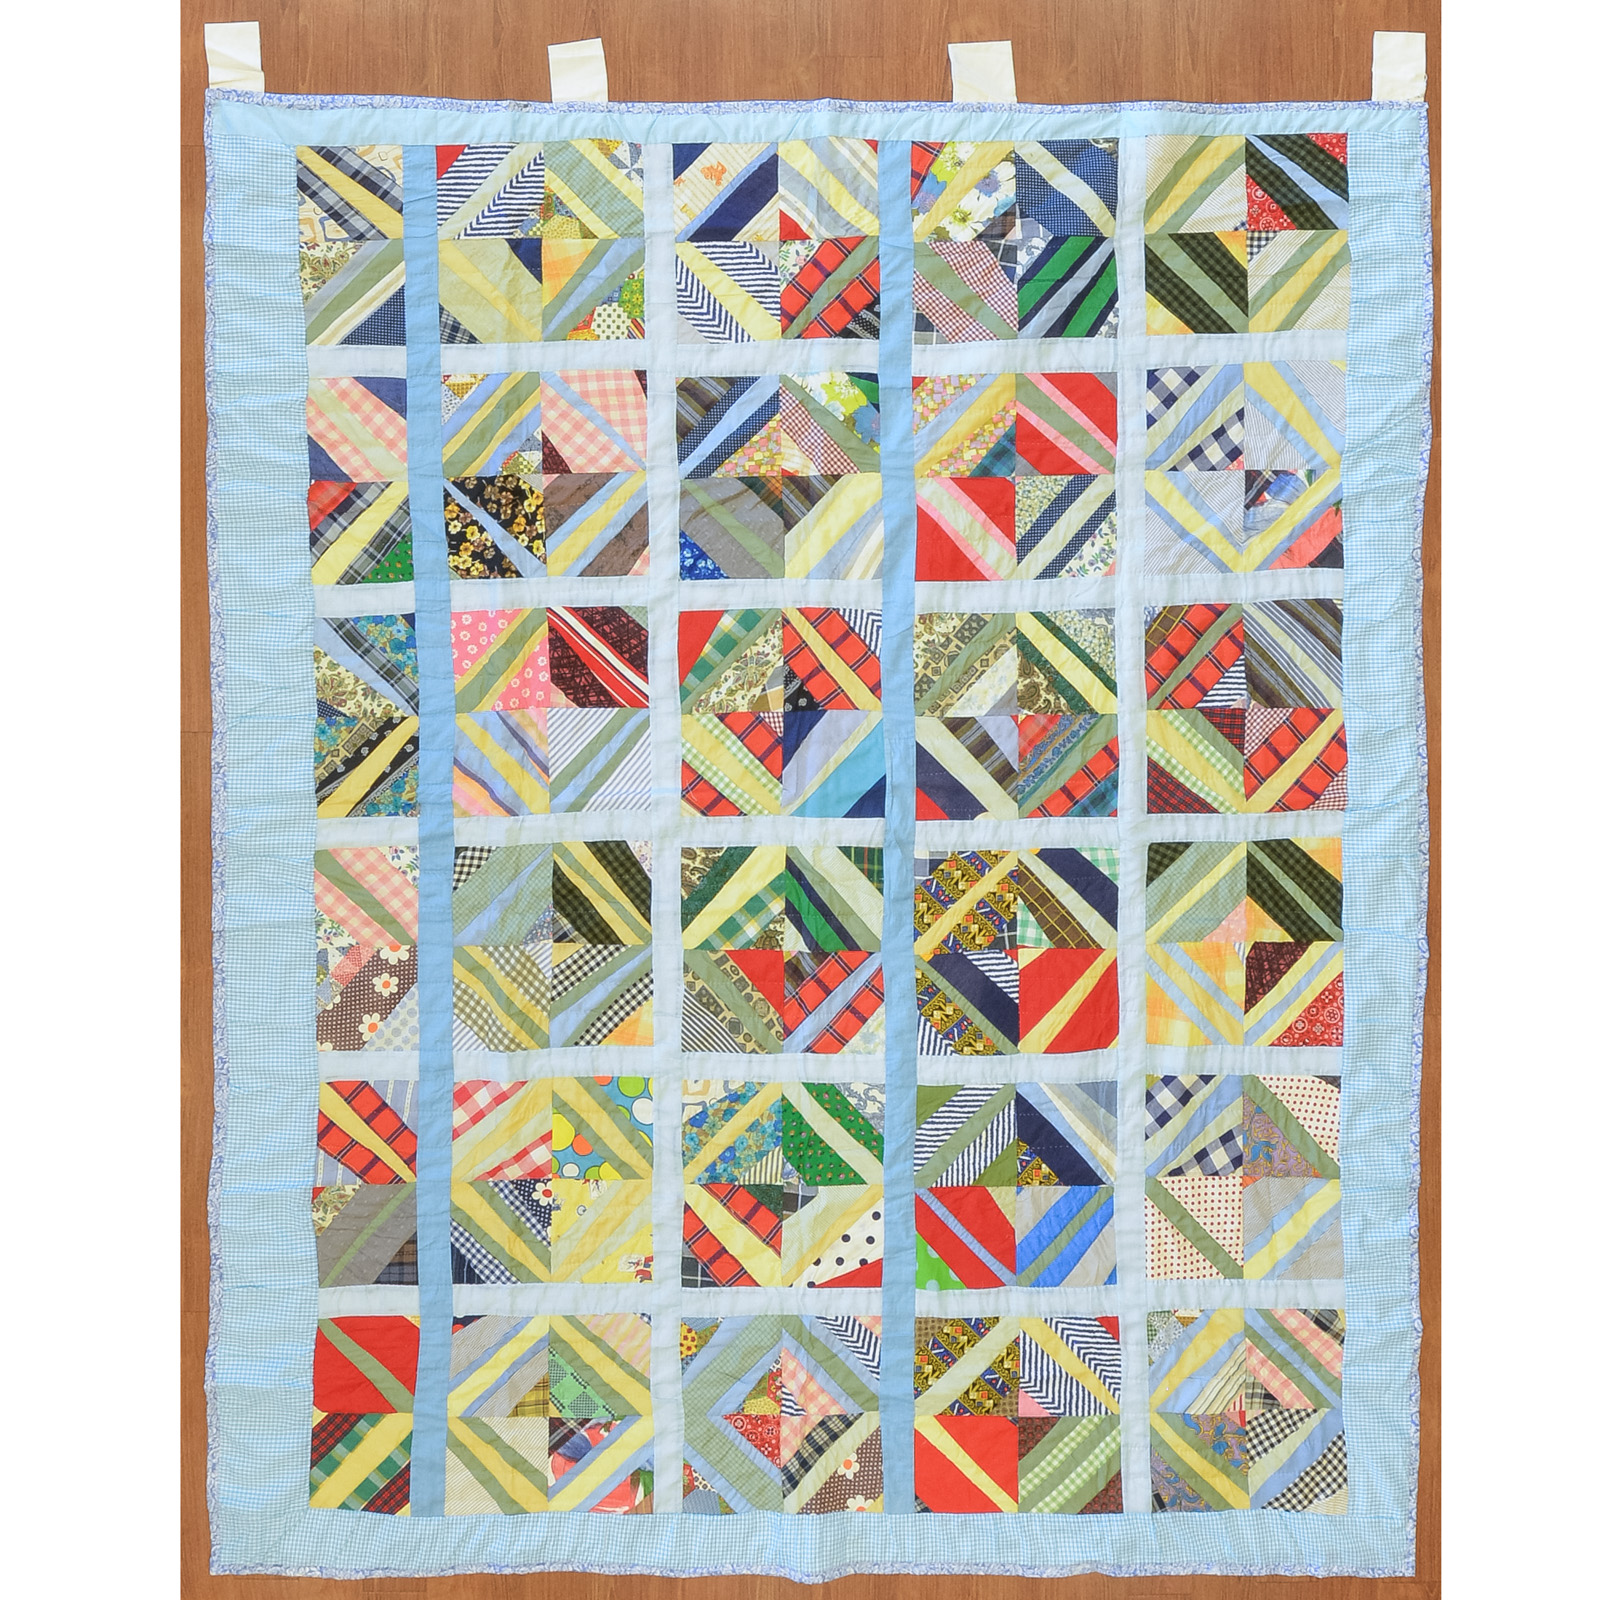 HAND-STITCHED PATCHWORK QUILT In